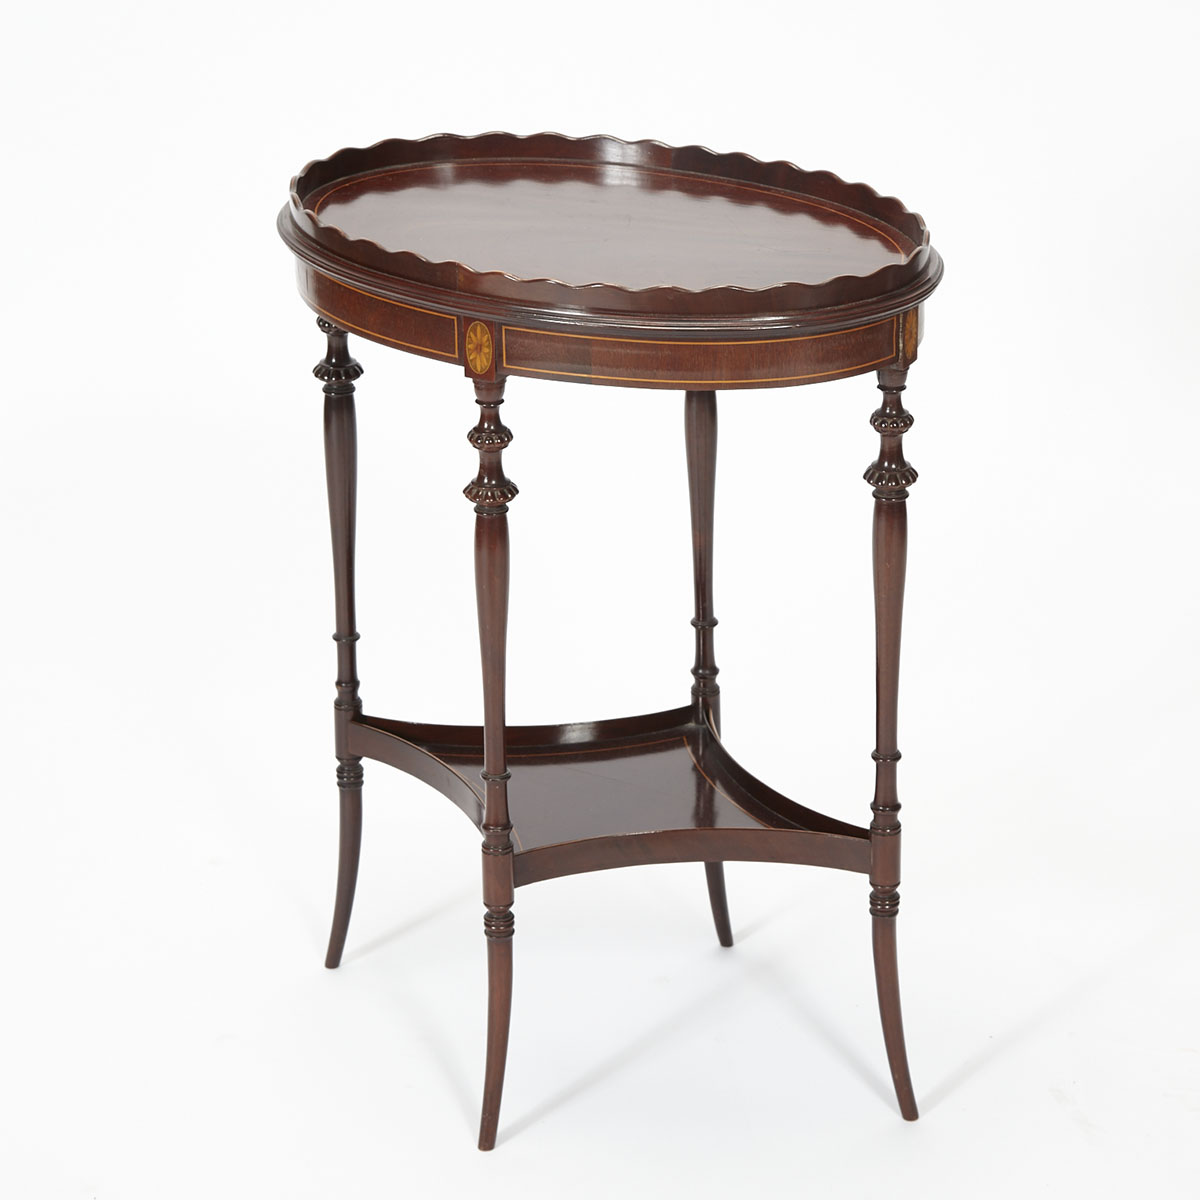 Edwardian Small Oval Inlaid Mahogany Side Table with Gallery Top, early 20th century